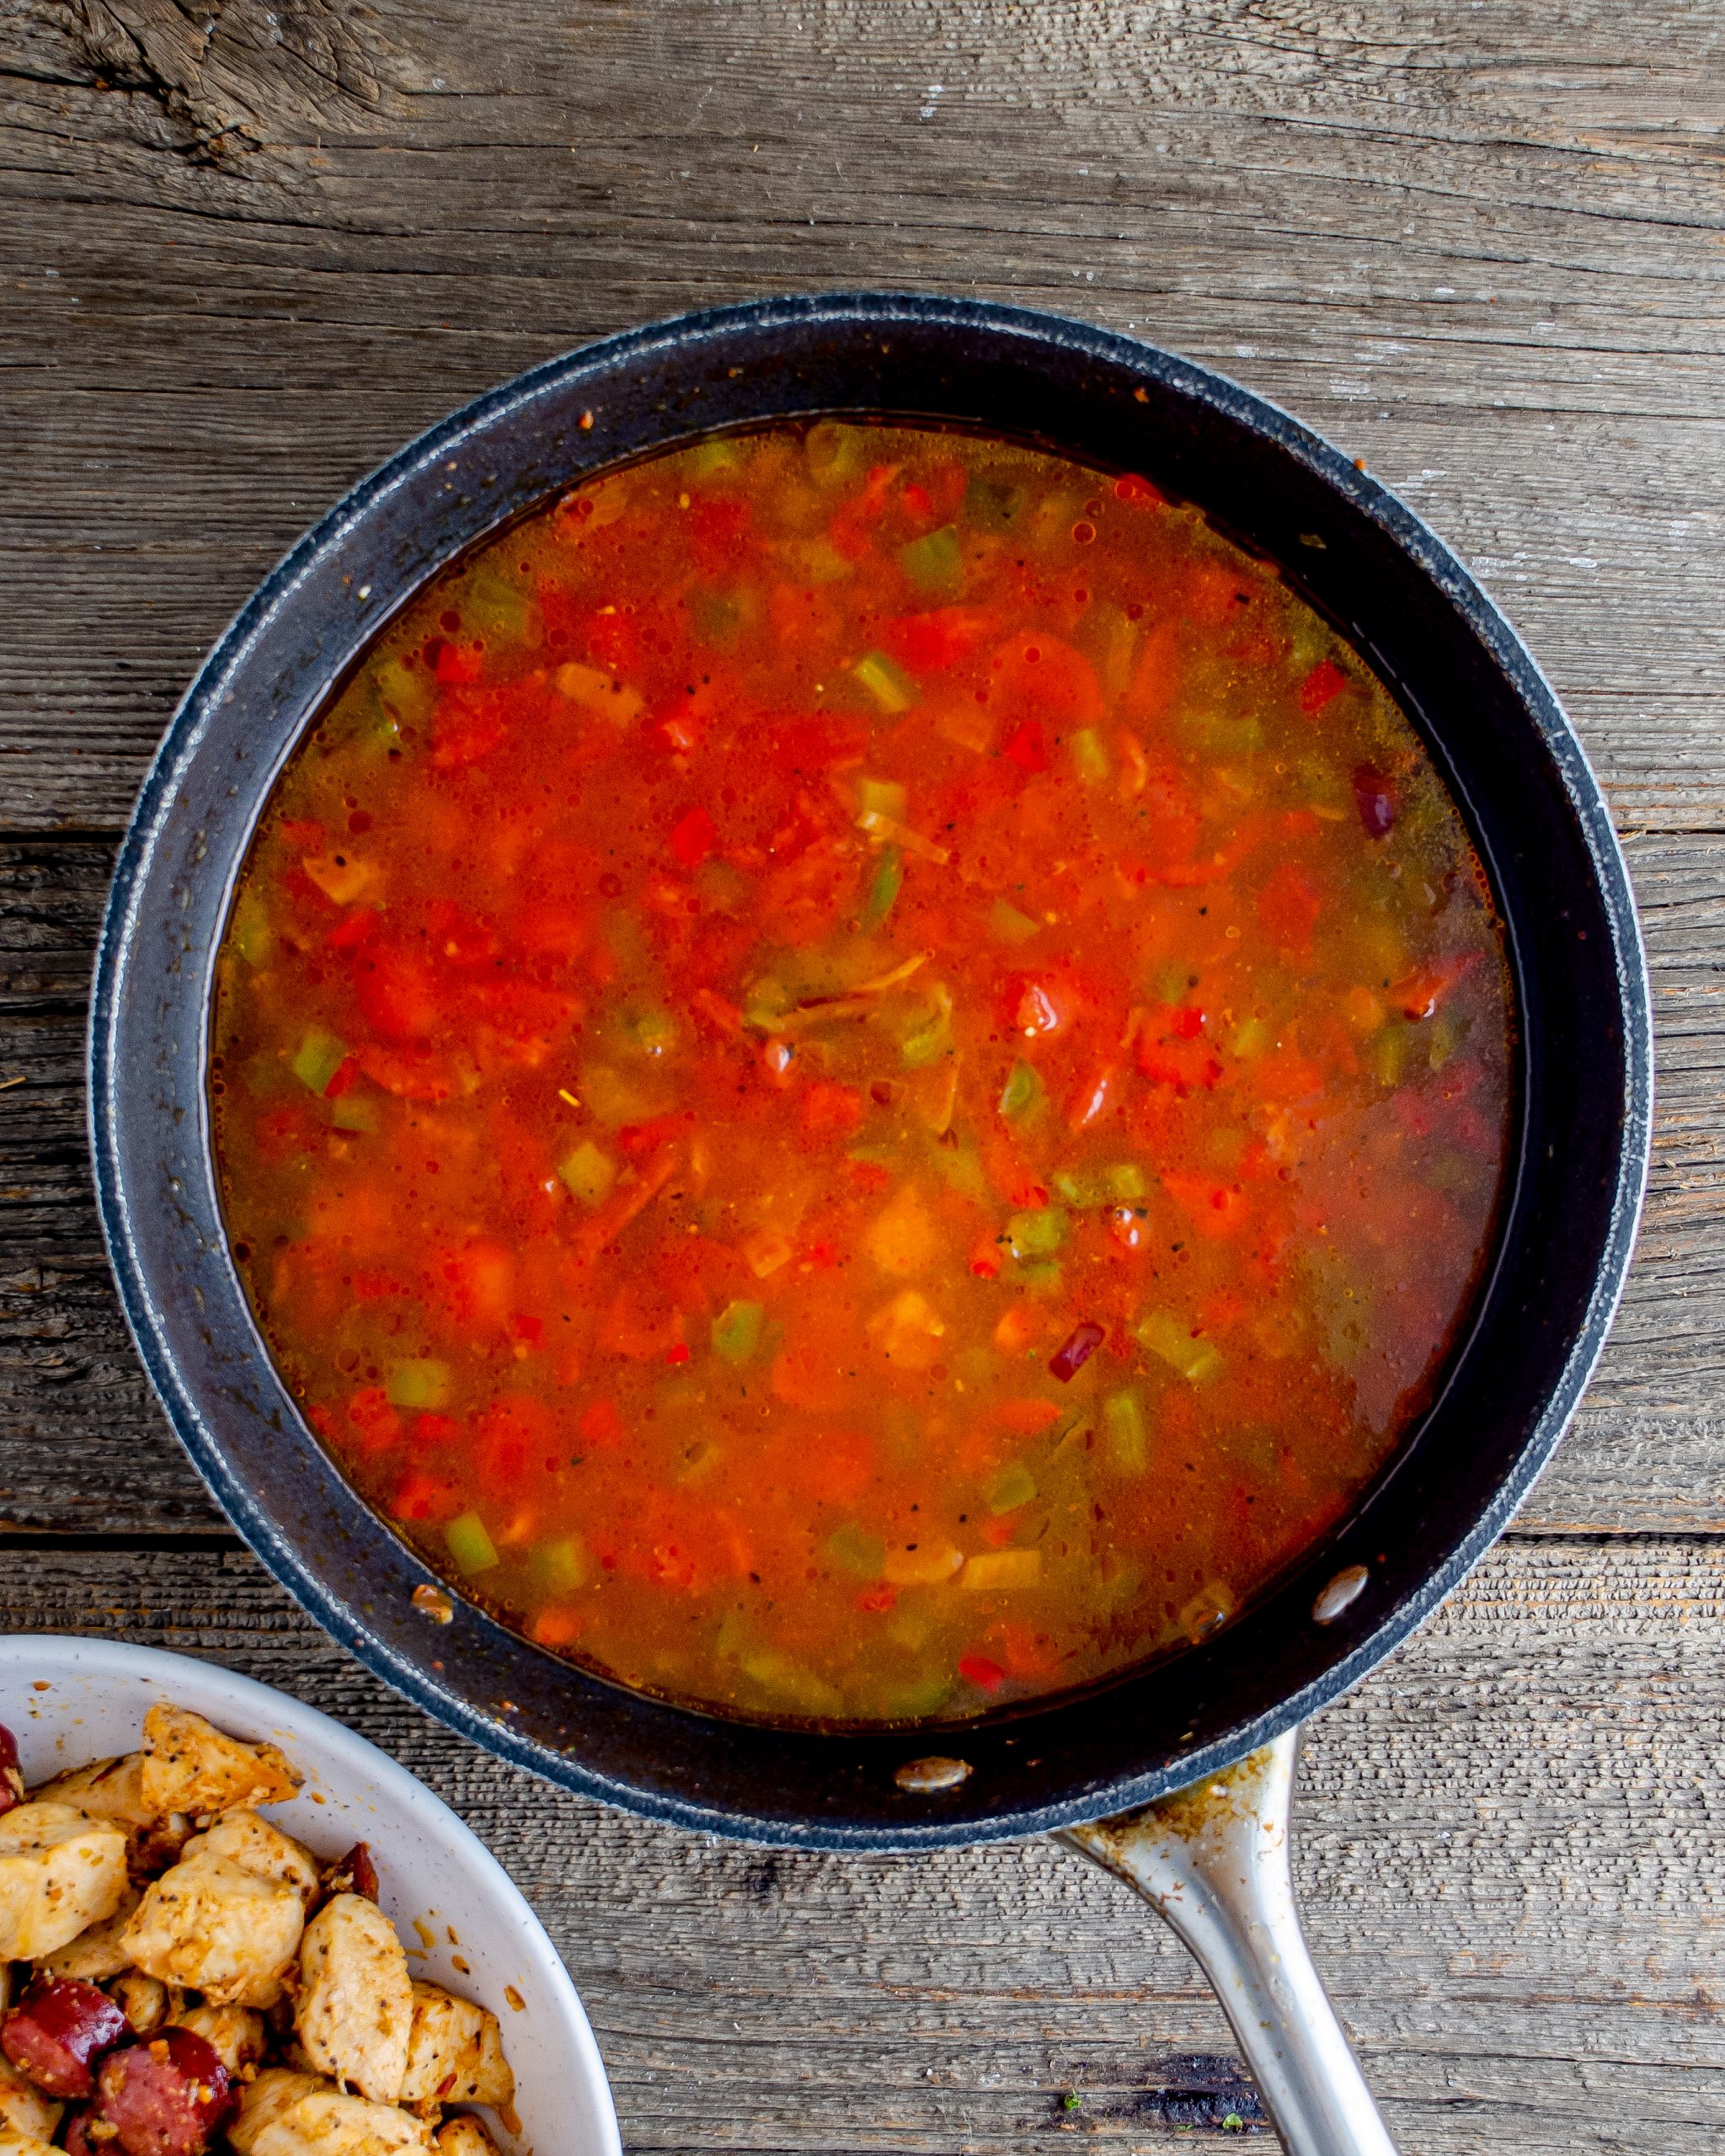 Pour the chicken broth and tomatoes into the skillet, and stir to combine.